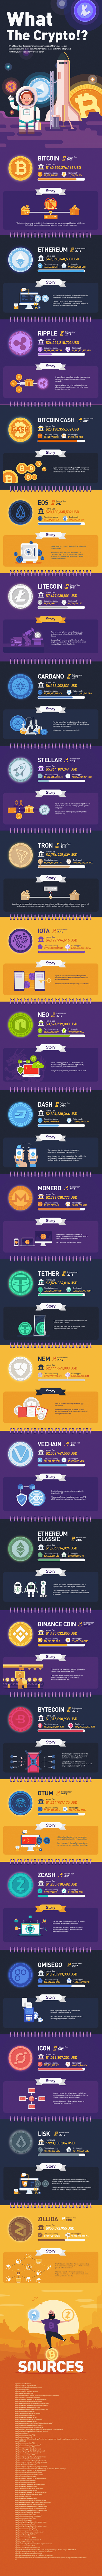 What is Crypto - Infographic